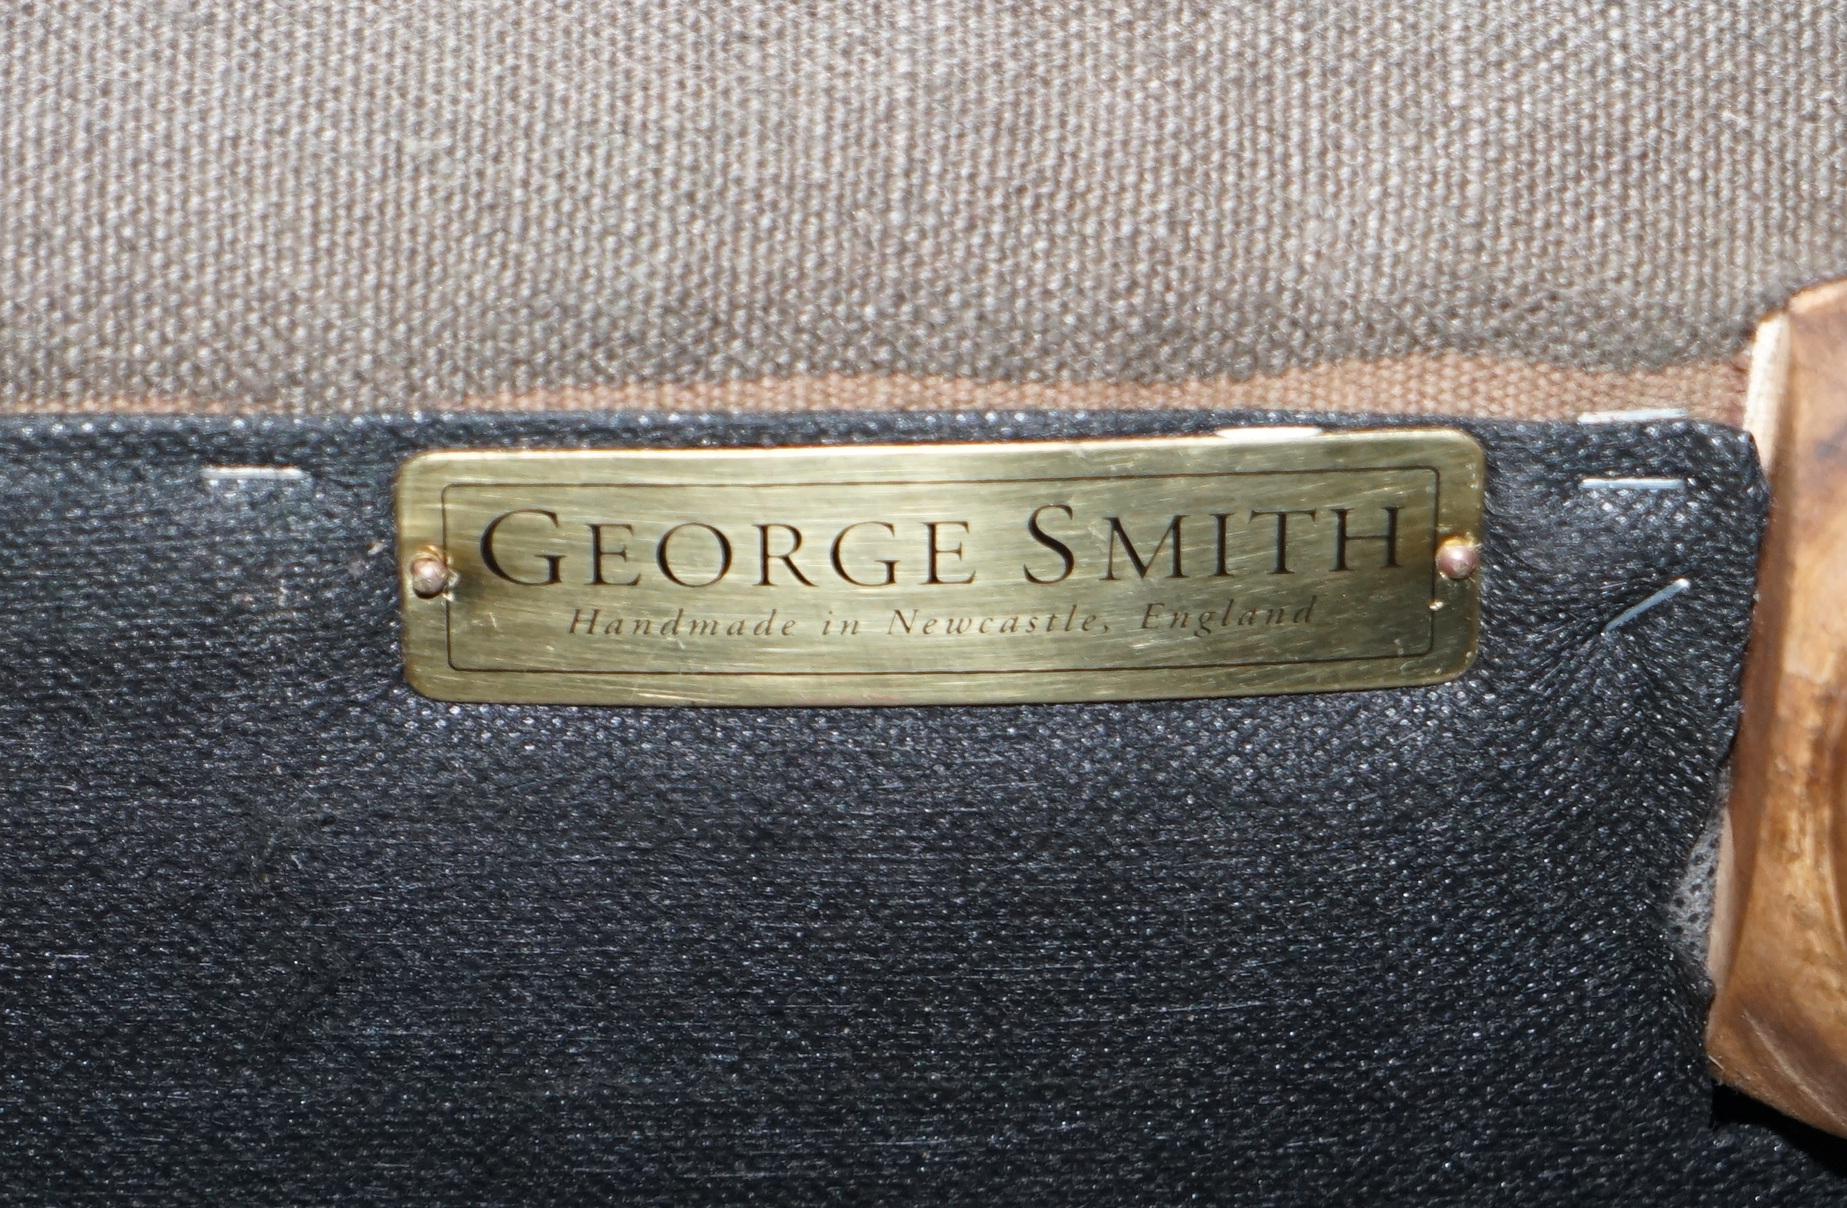 Wimbledon-Furniture

Wimbledon-Furniture is delighted to offer for sale this lovely full sized extra deep George Smith Signature Scroll arm sofa RRP £13,000 

Please note the delivery fee listed is just a guide, it covers within the M25 only,